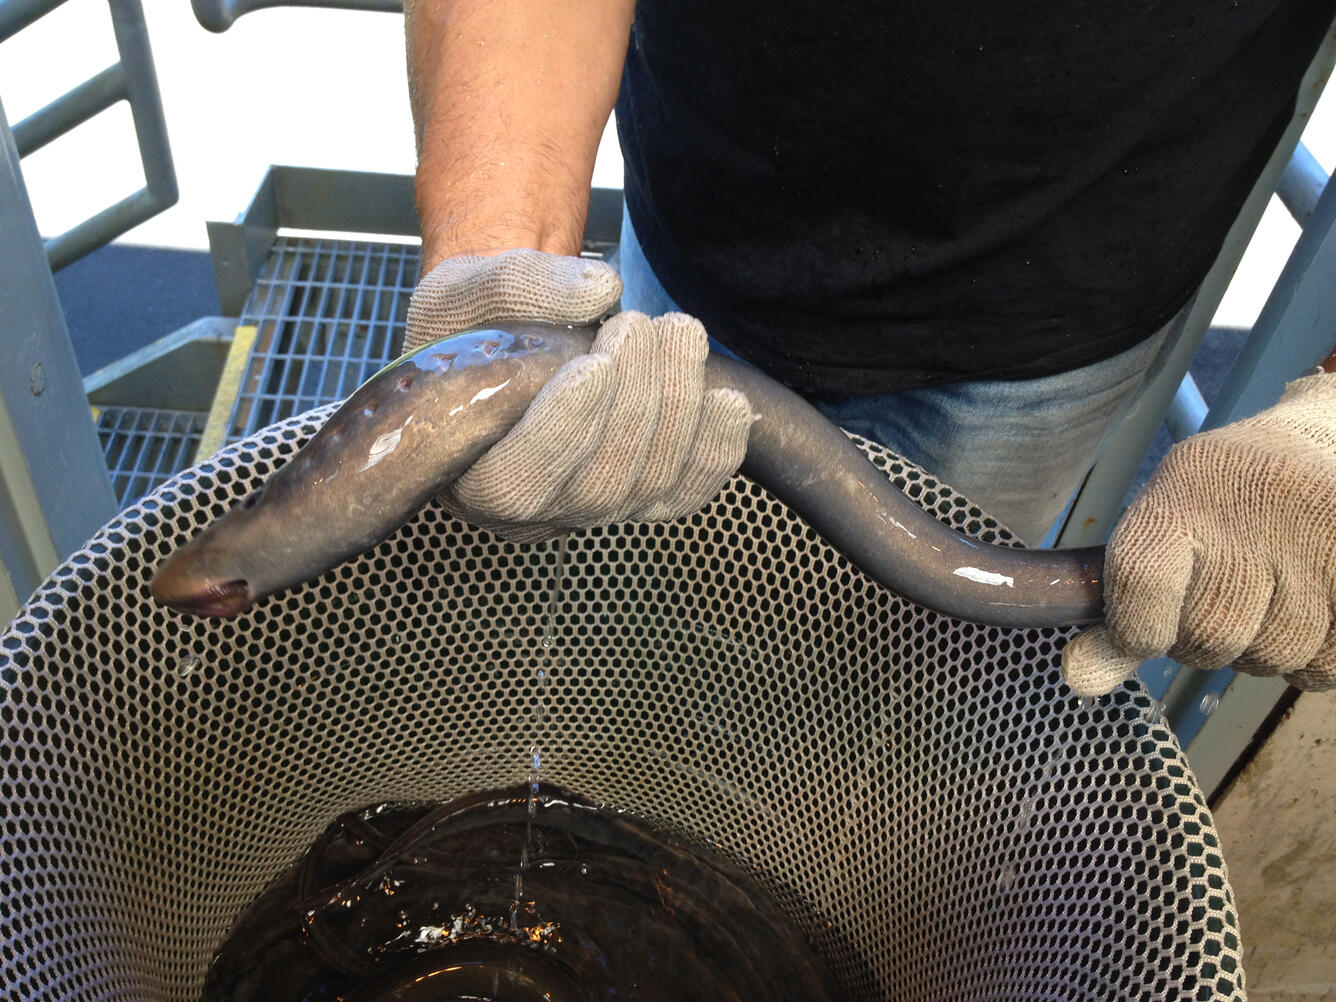 Scientist Holding an Adult Pacific Lamprey